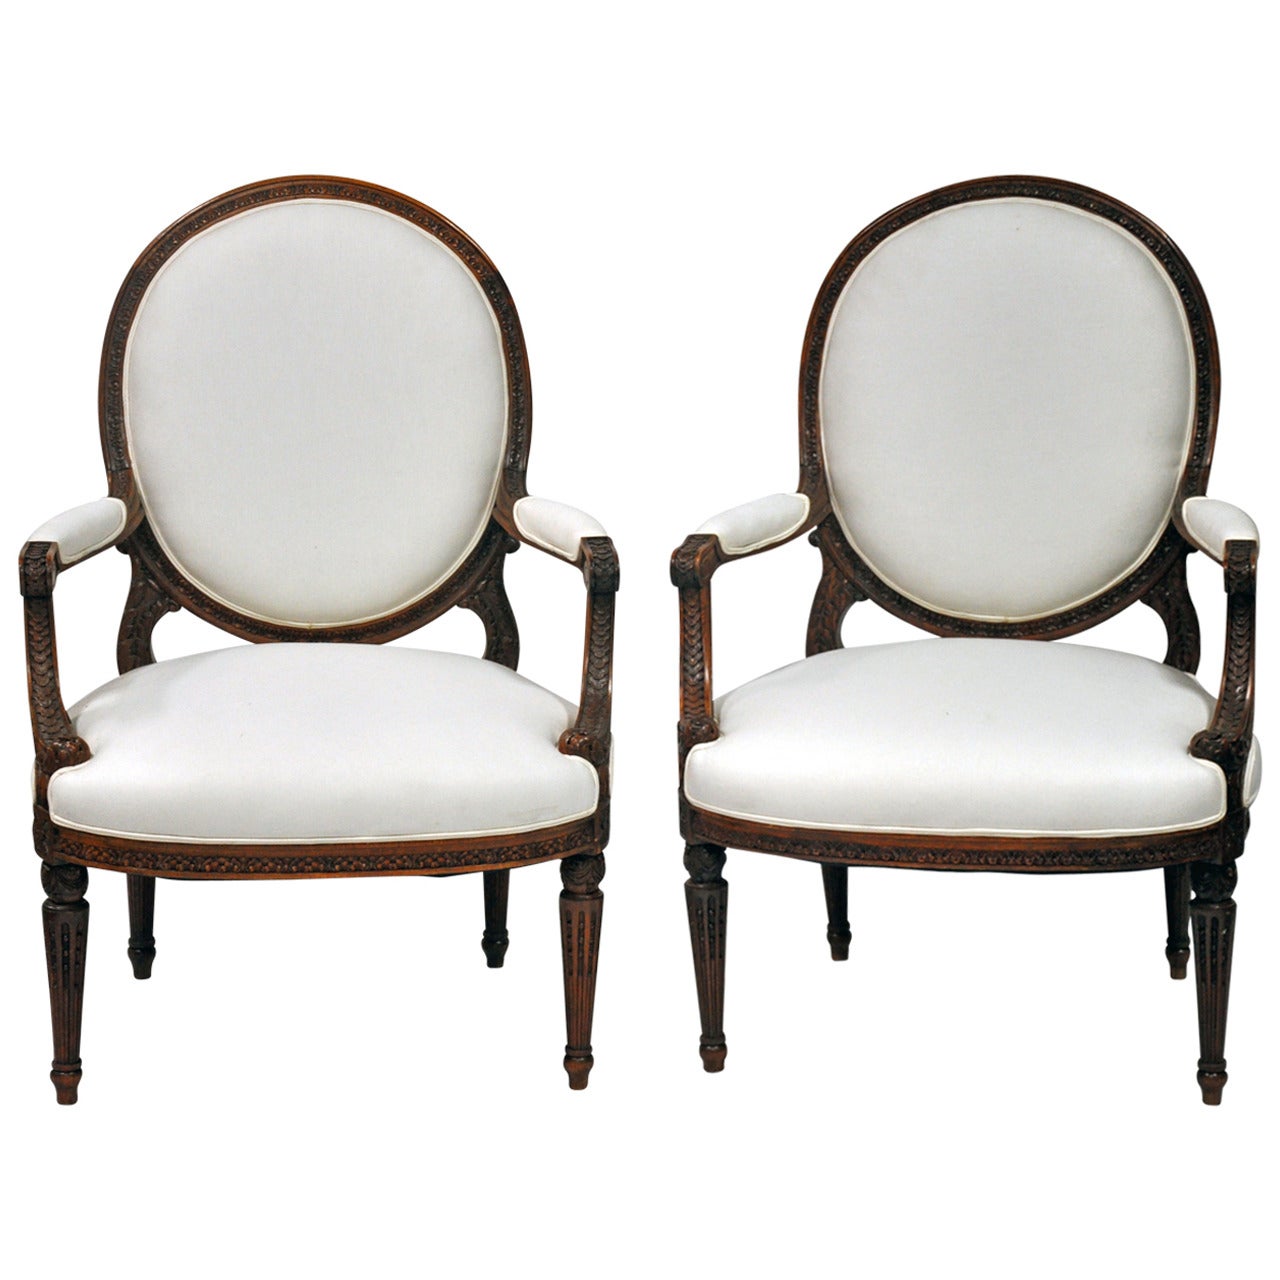 Pair of 19th Century French Louis XVI Style Fauteuil in Walnut